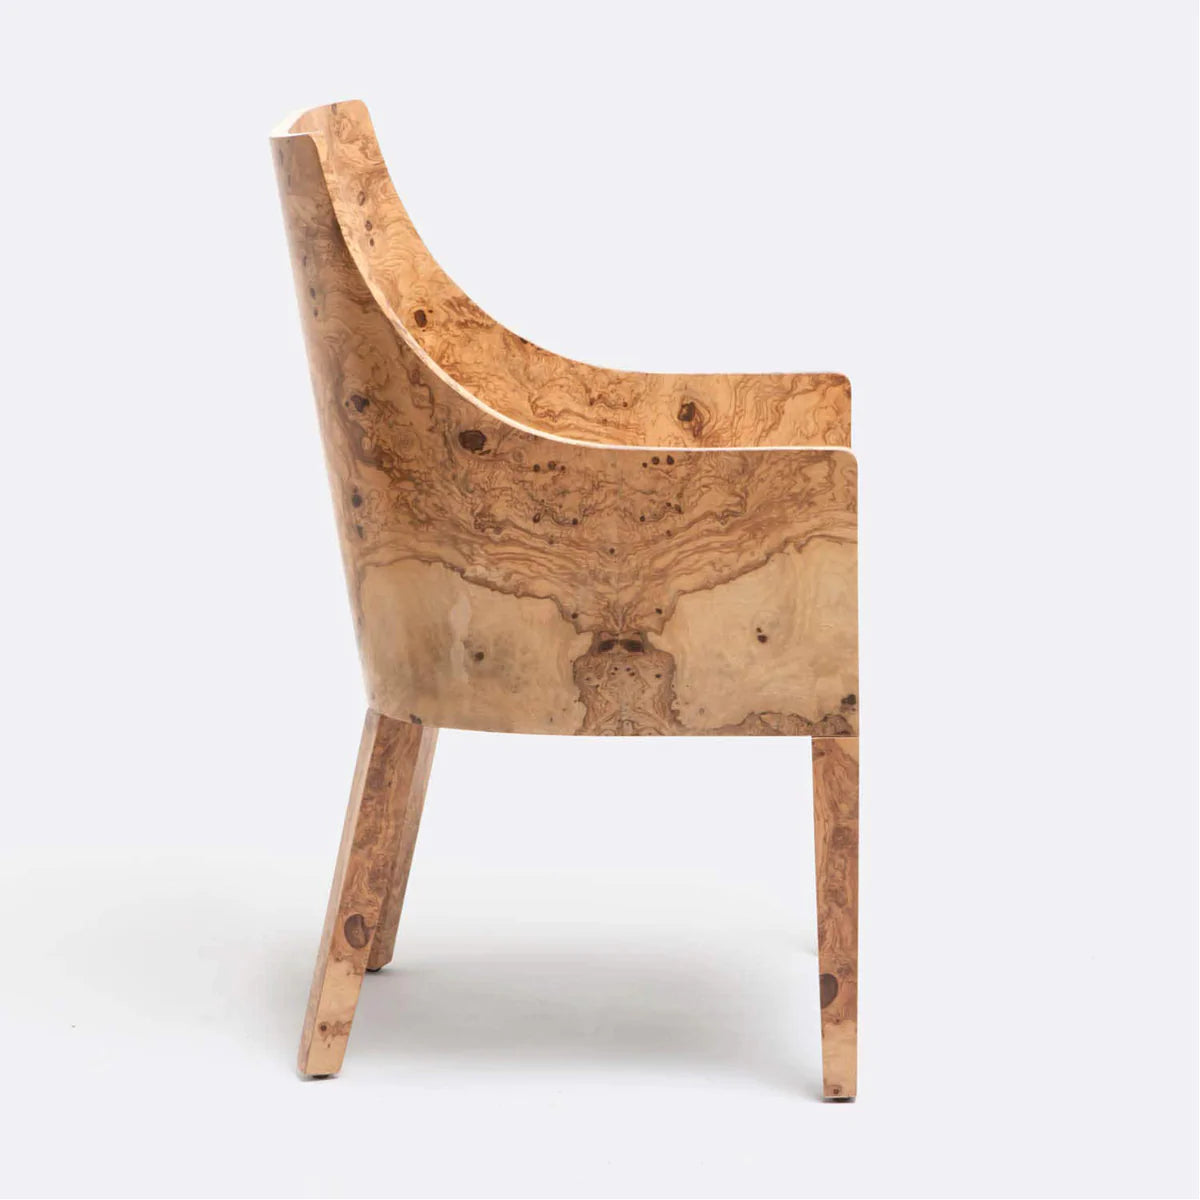 Made Goods Everett Olive Ash Arm Chair in Clyde Fabric